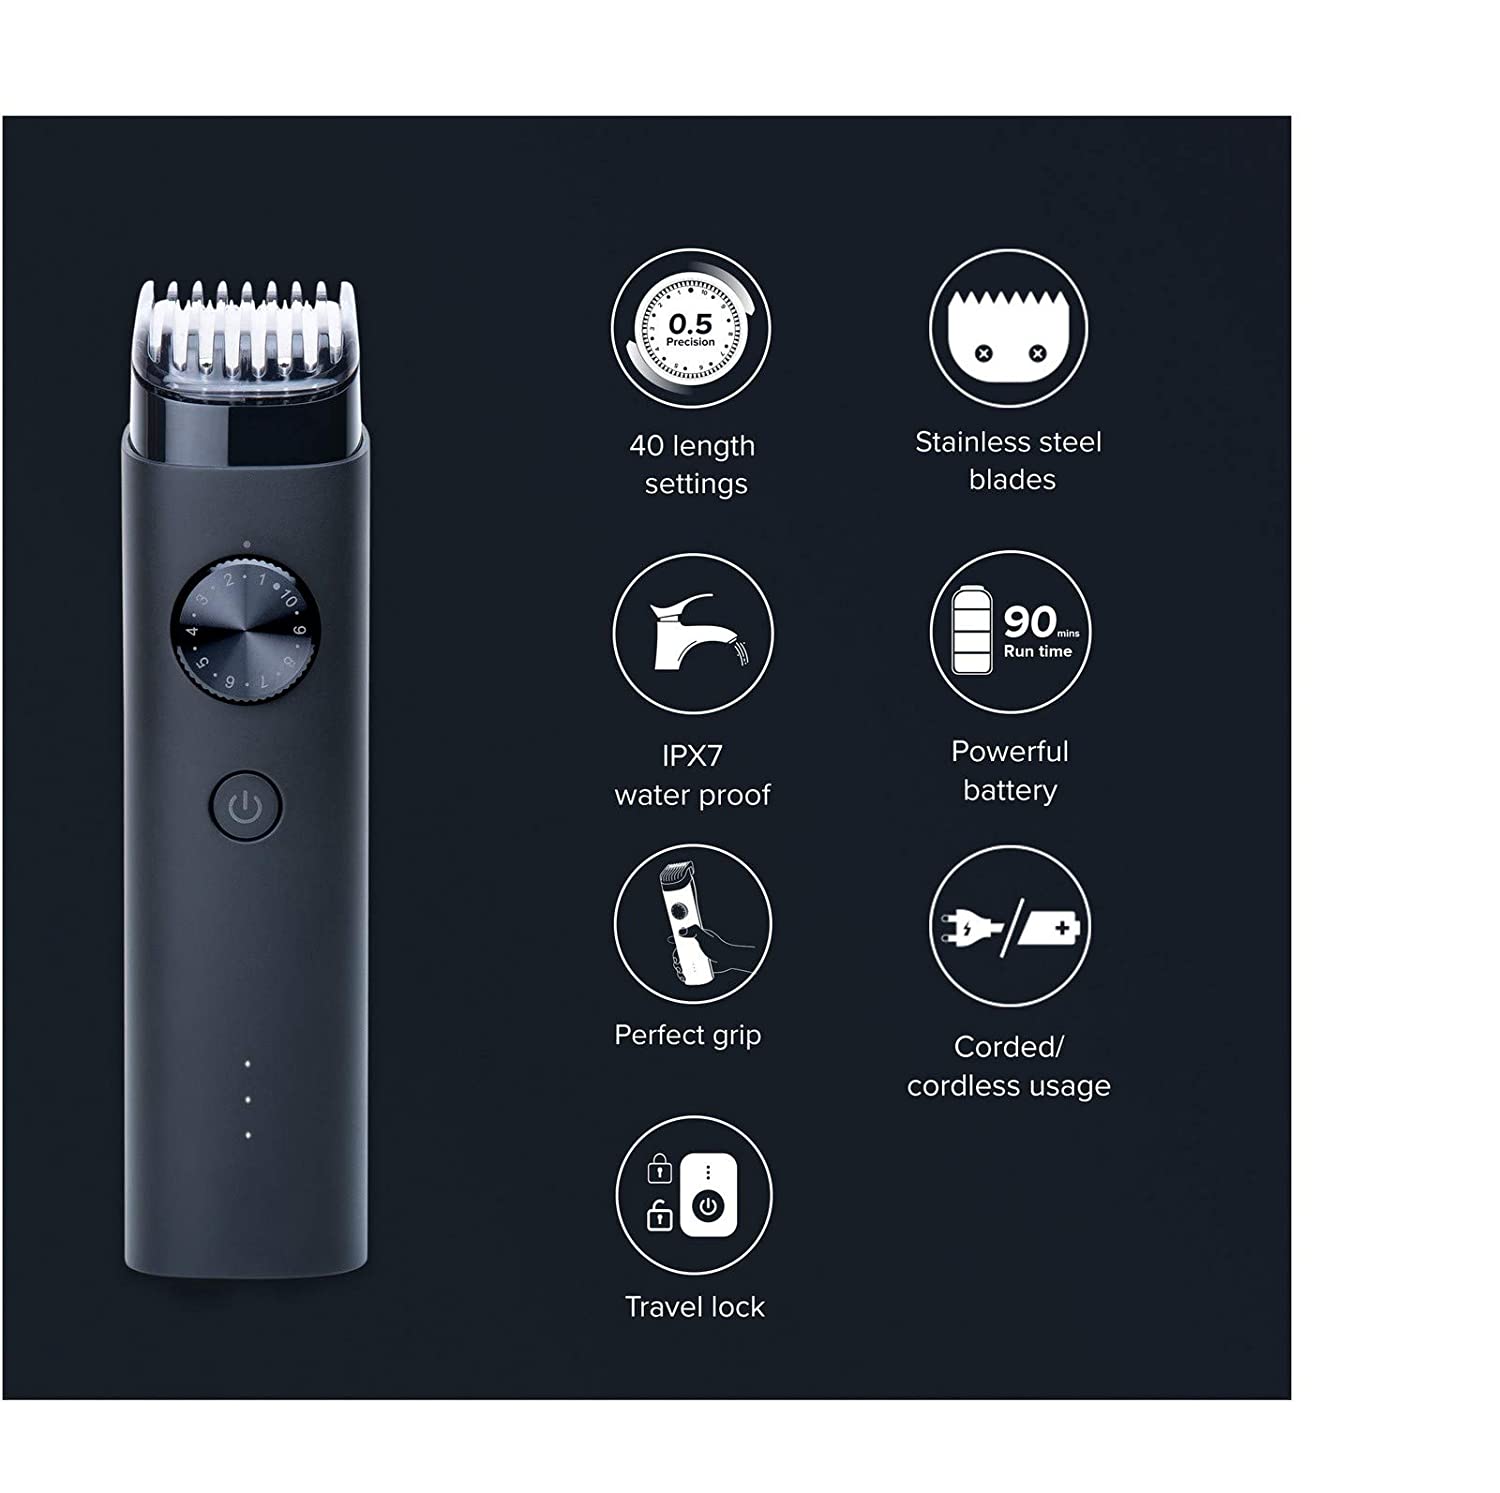 Mi Beard Trimmer for men, full body Waterproof IPX7, 90 mins runtime, Fast Charging, 40 length settings, cordless+ corded dual use, charging indicator